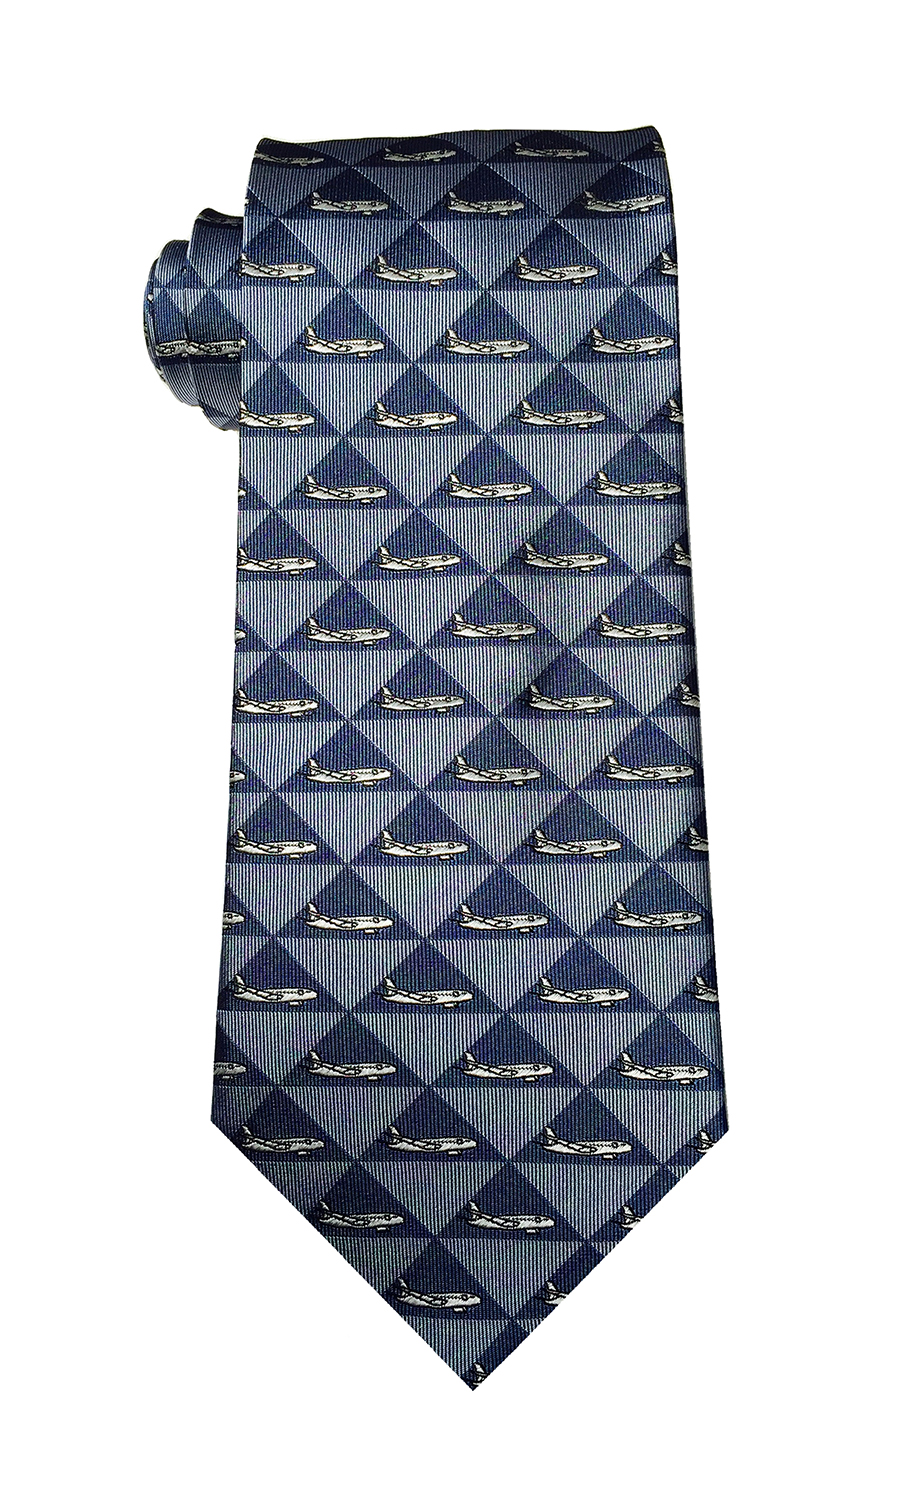 Airbus 320 airliner tie in grey blue and indigo